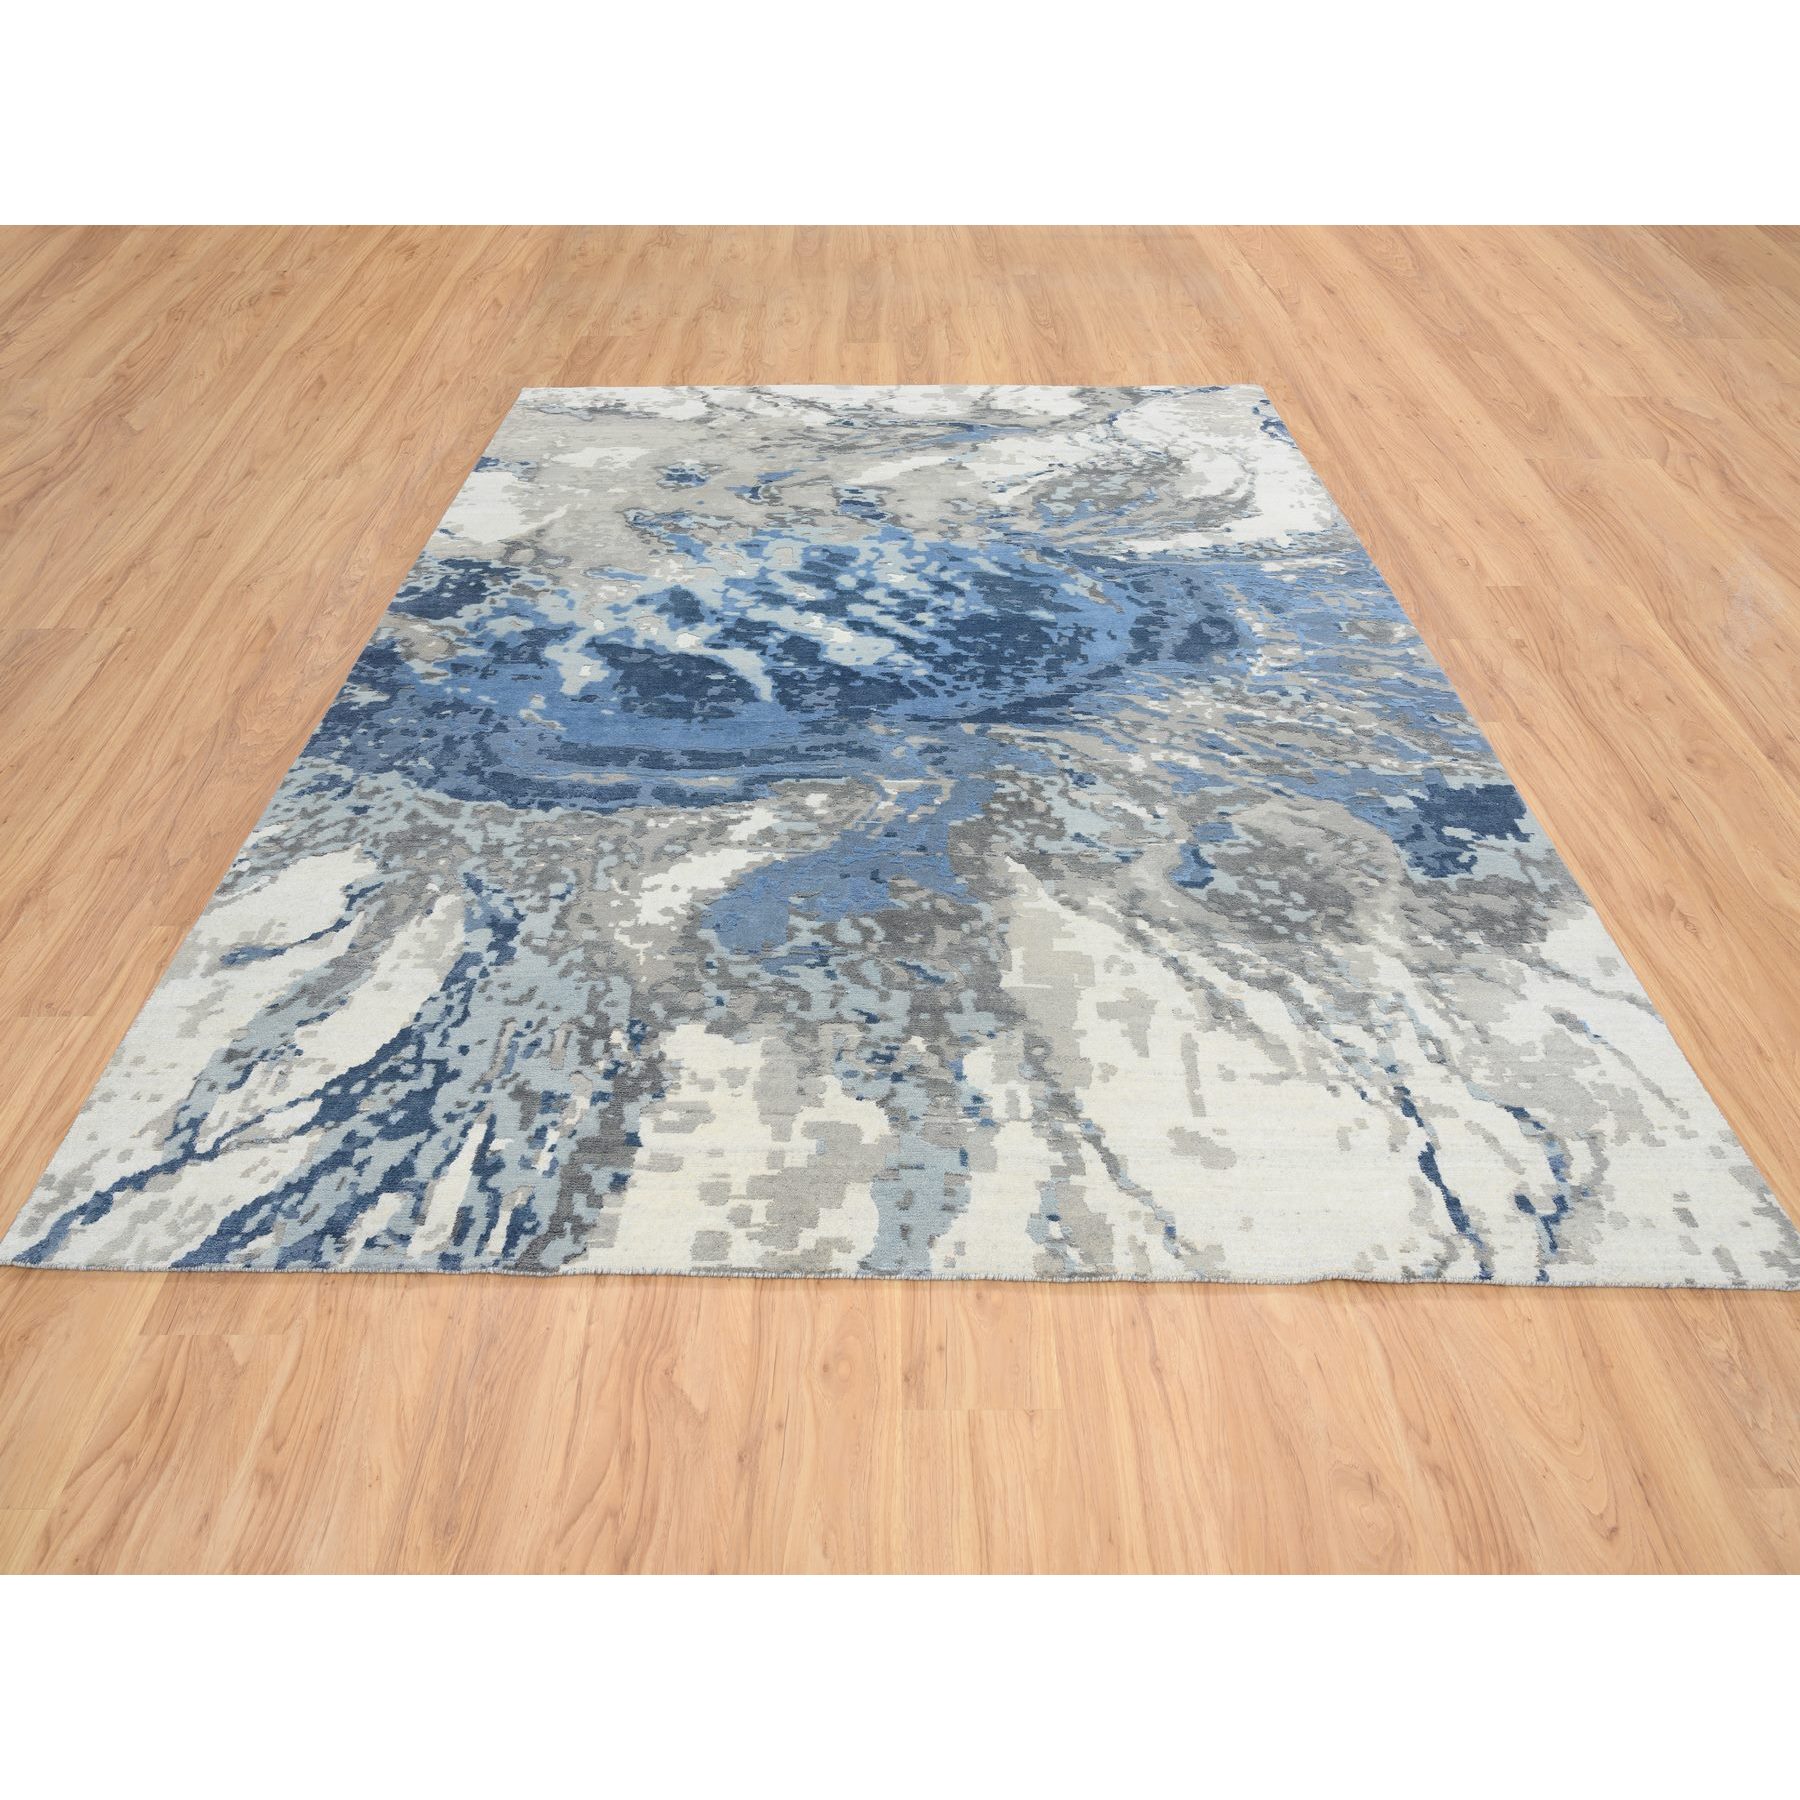 8'1"x10' Blue, Abstract Design Hi-low Pile, Wool and Silk Hand Woven, Oriental Rug 